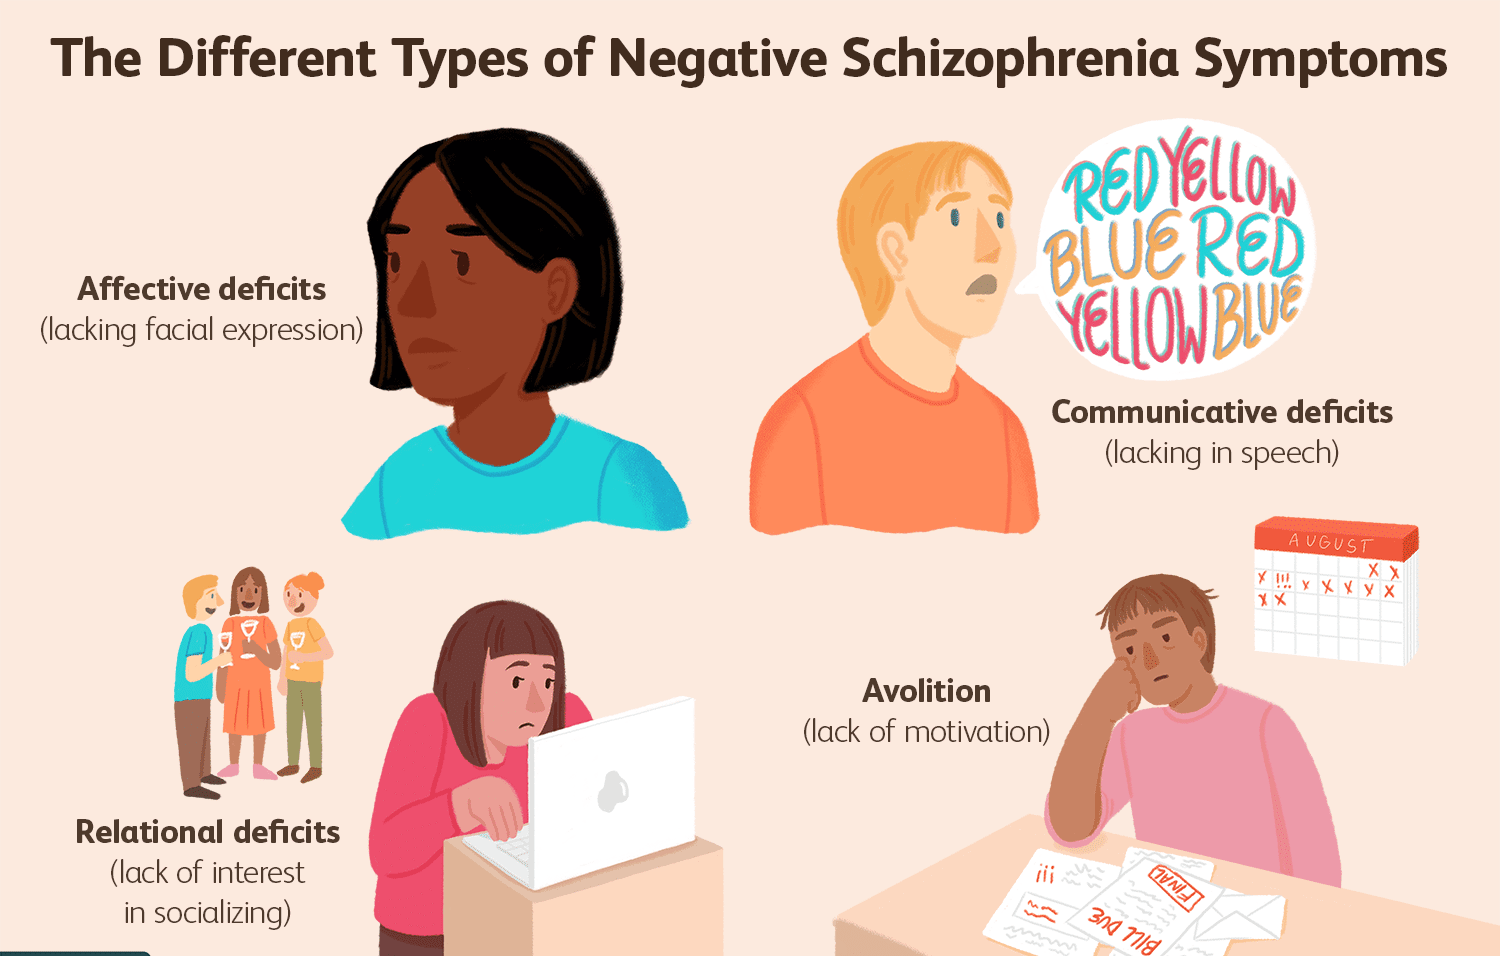 Schizophrenia Symptoms And Tips To Cope With Them